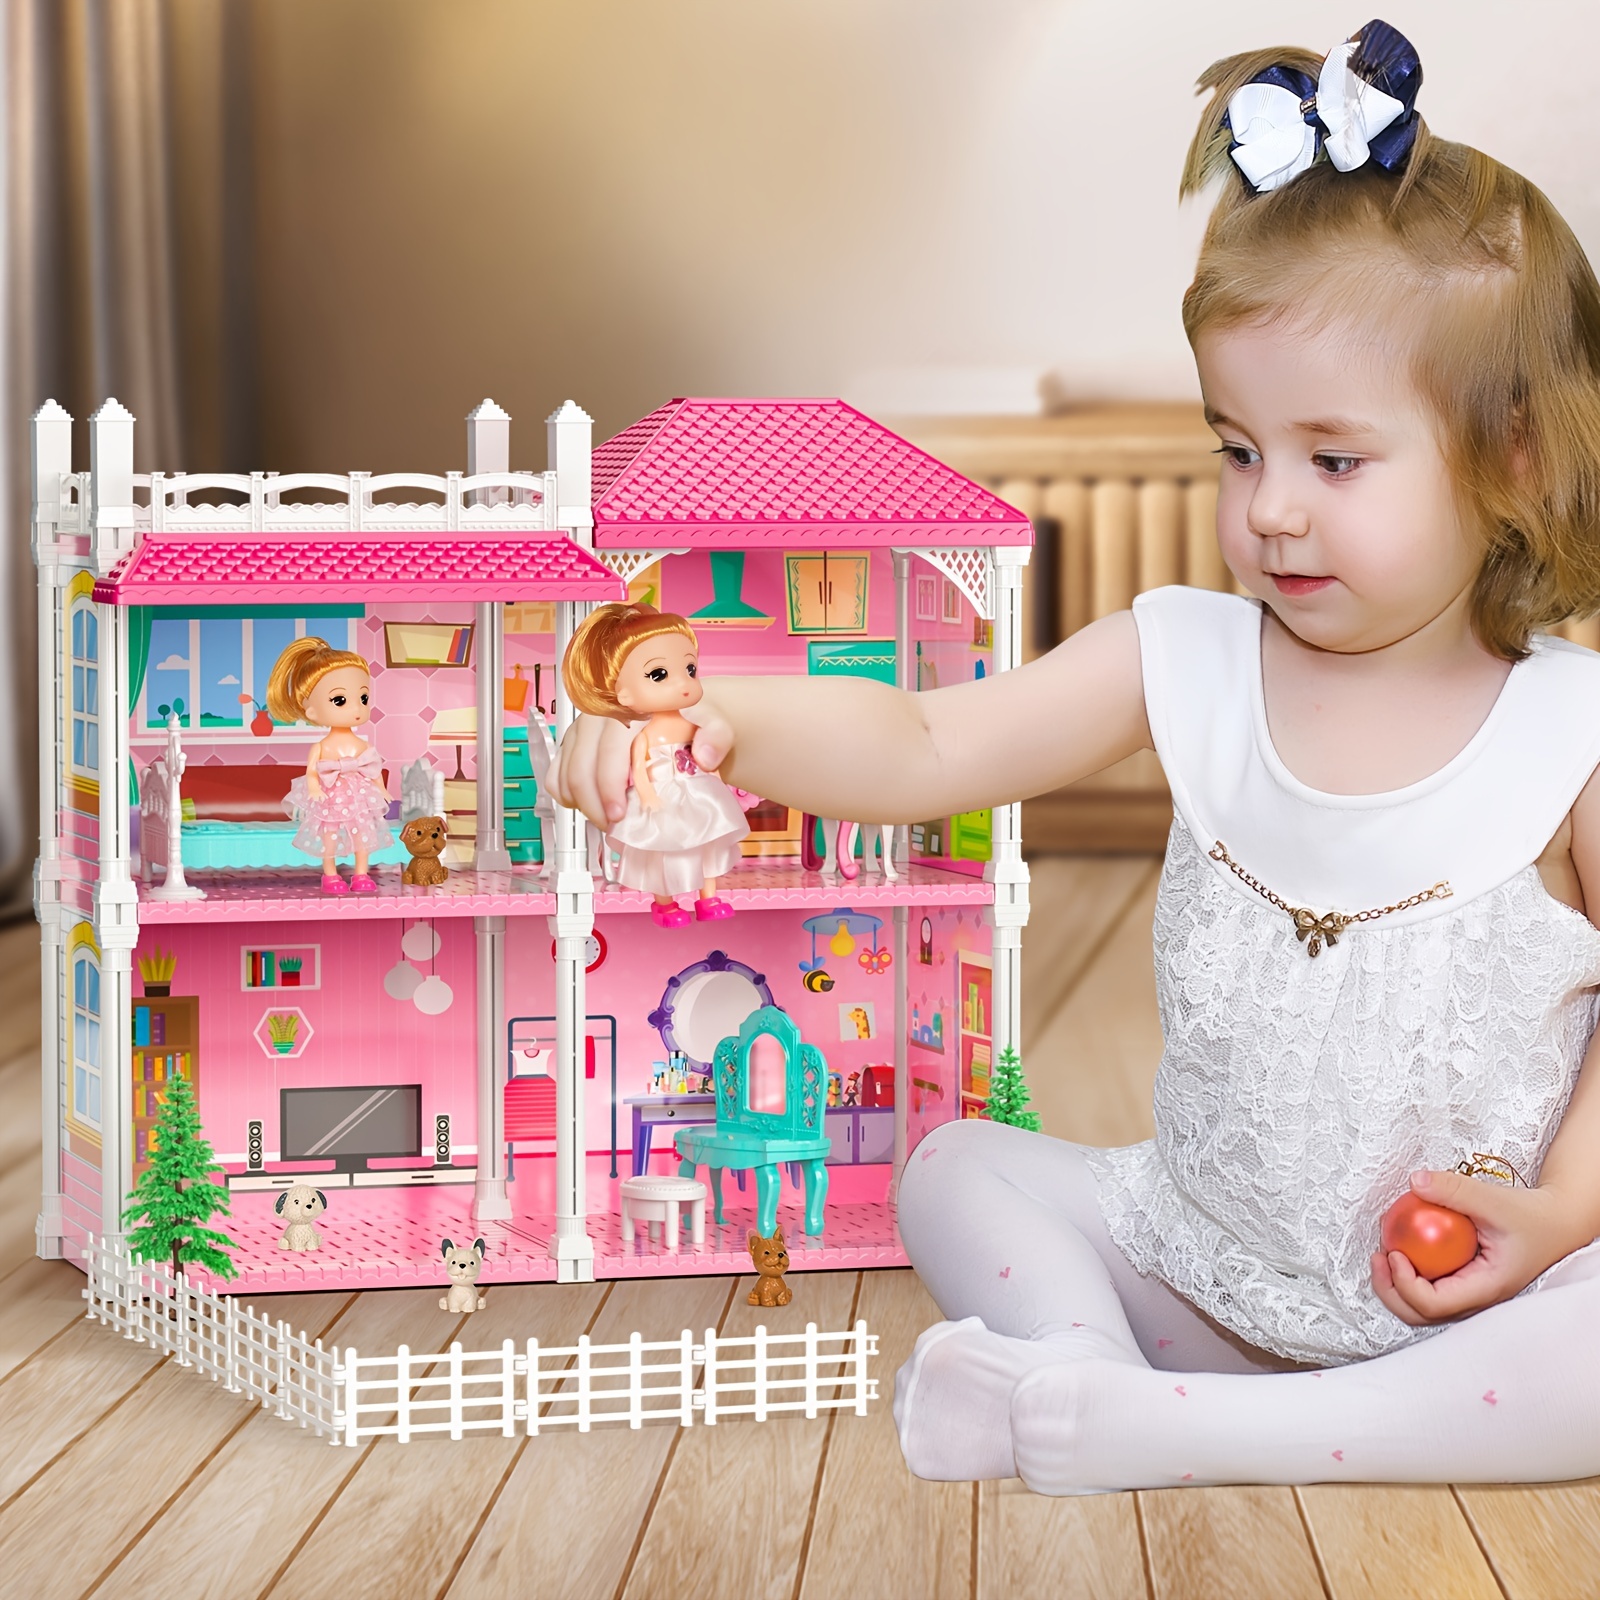 Barbie House, Dolls And Accessories